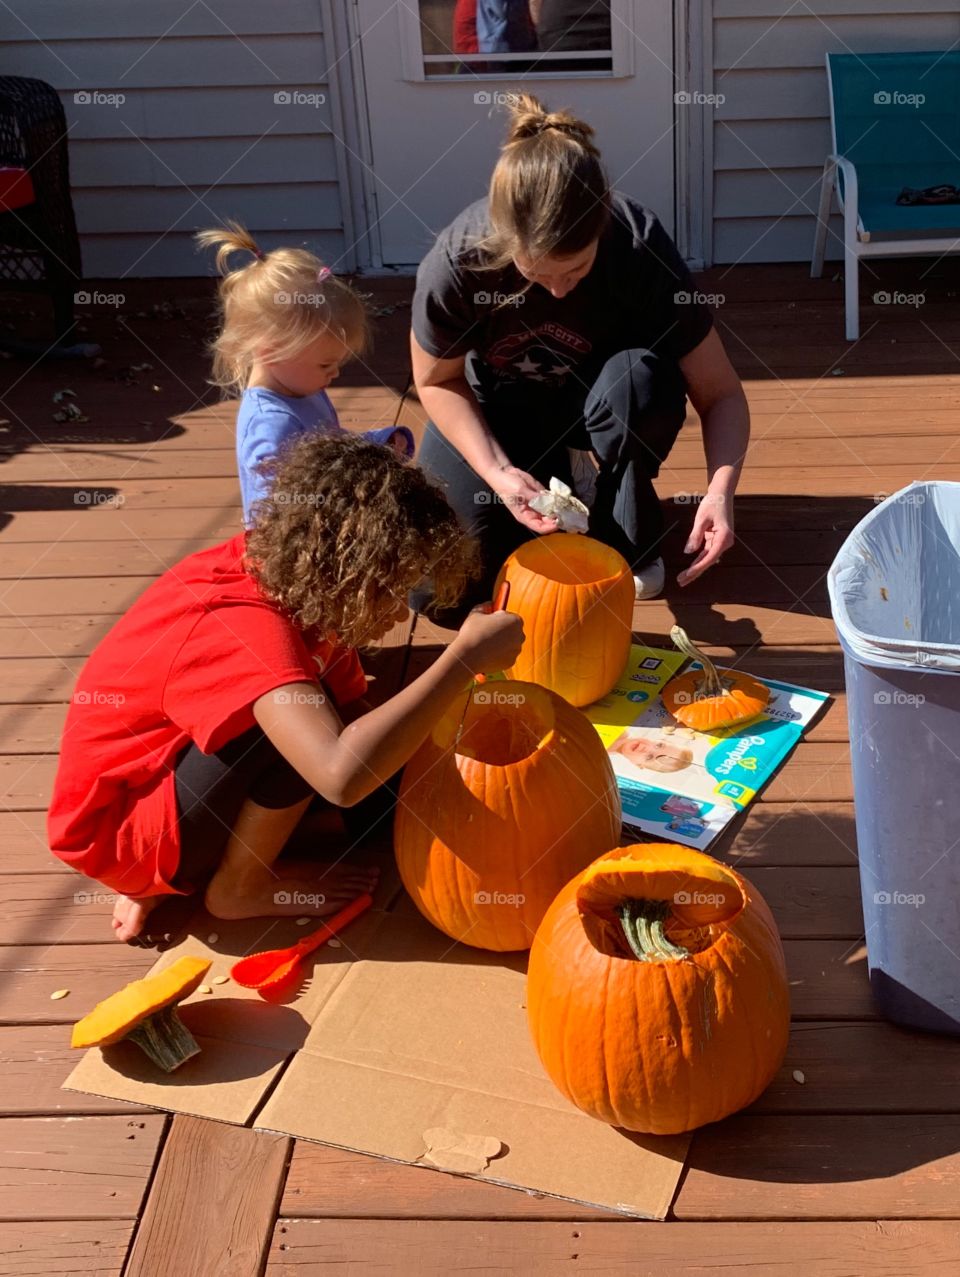 Fun day of pumpkin carving and activities with family and friends getting ready for Halloween 